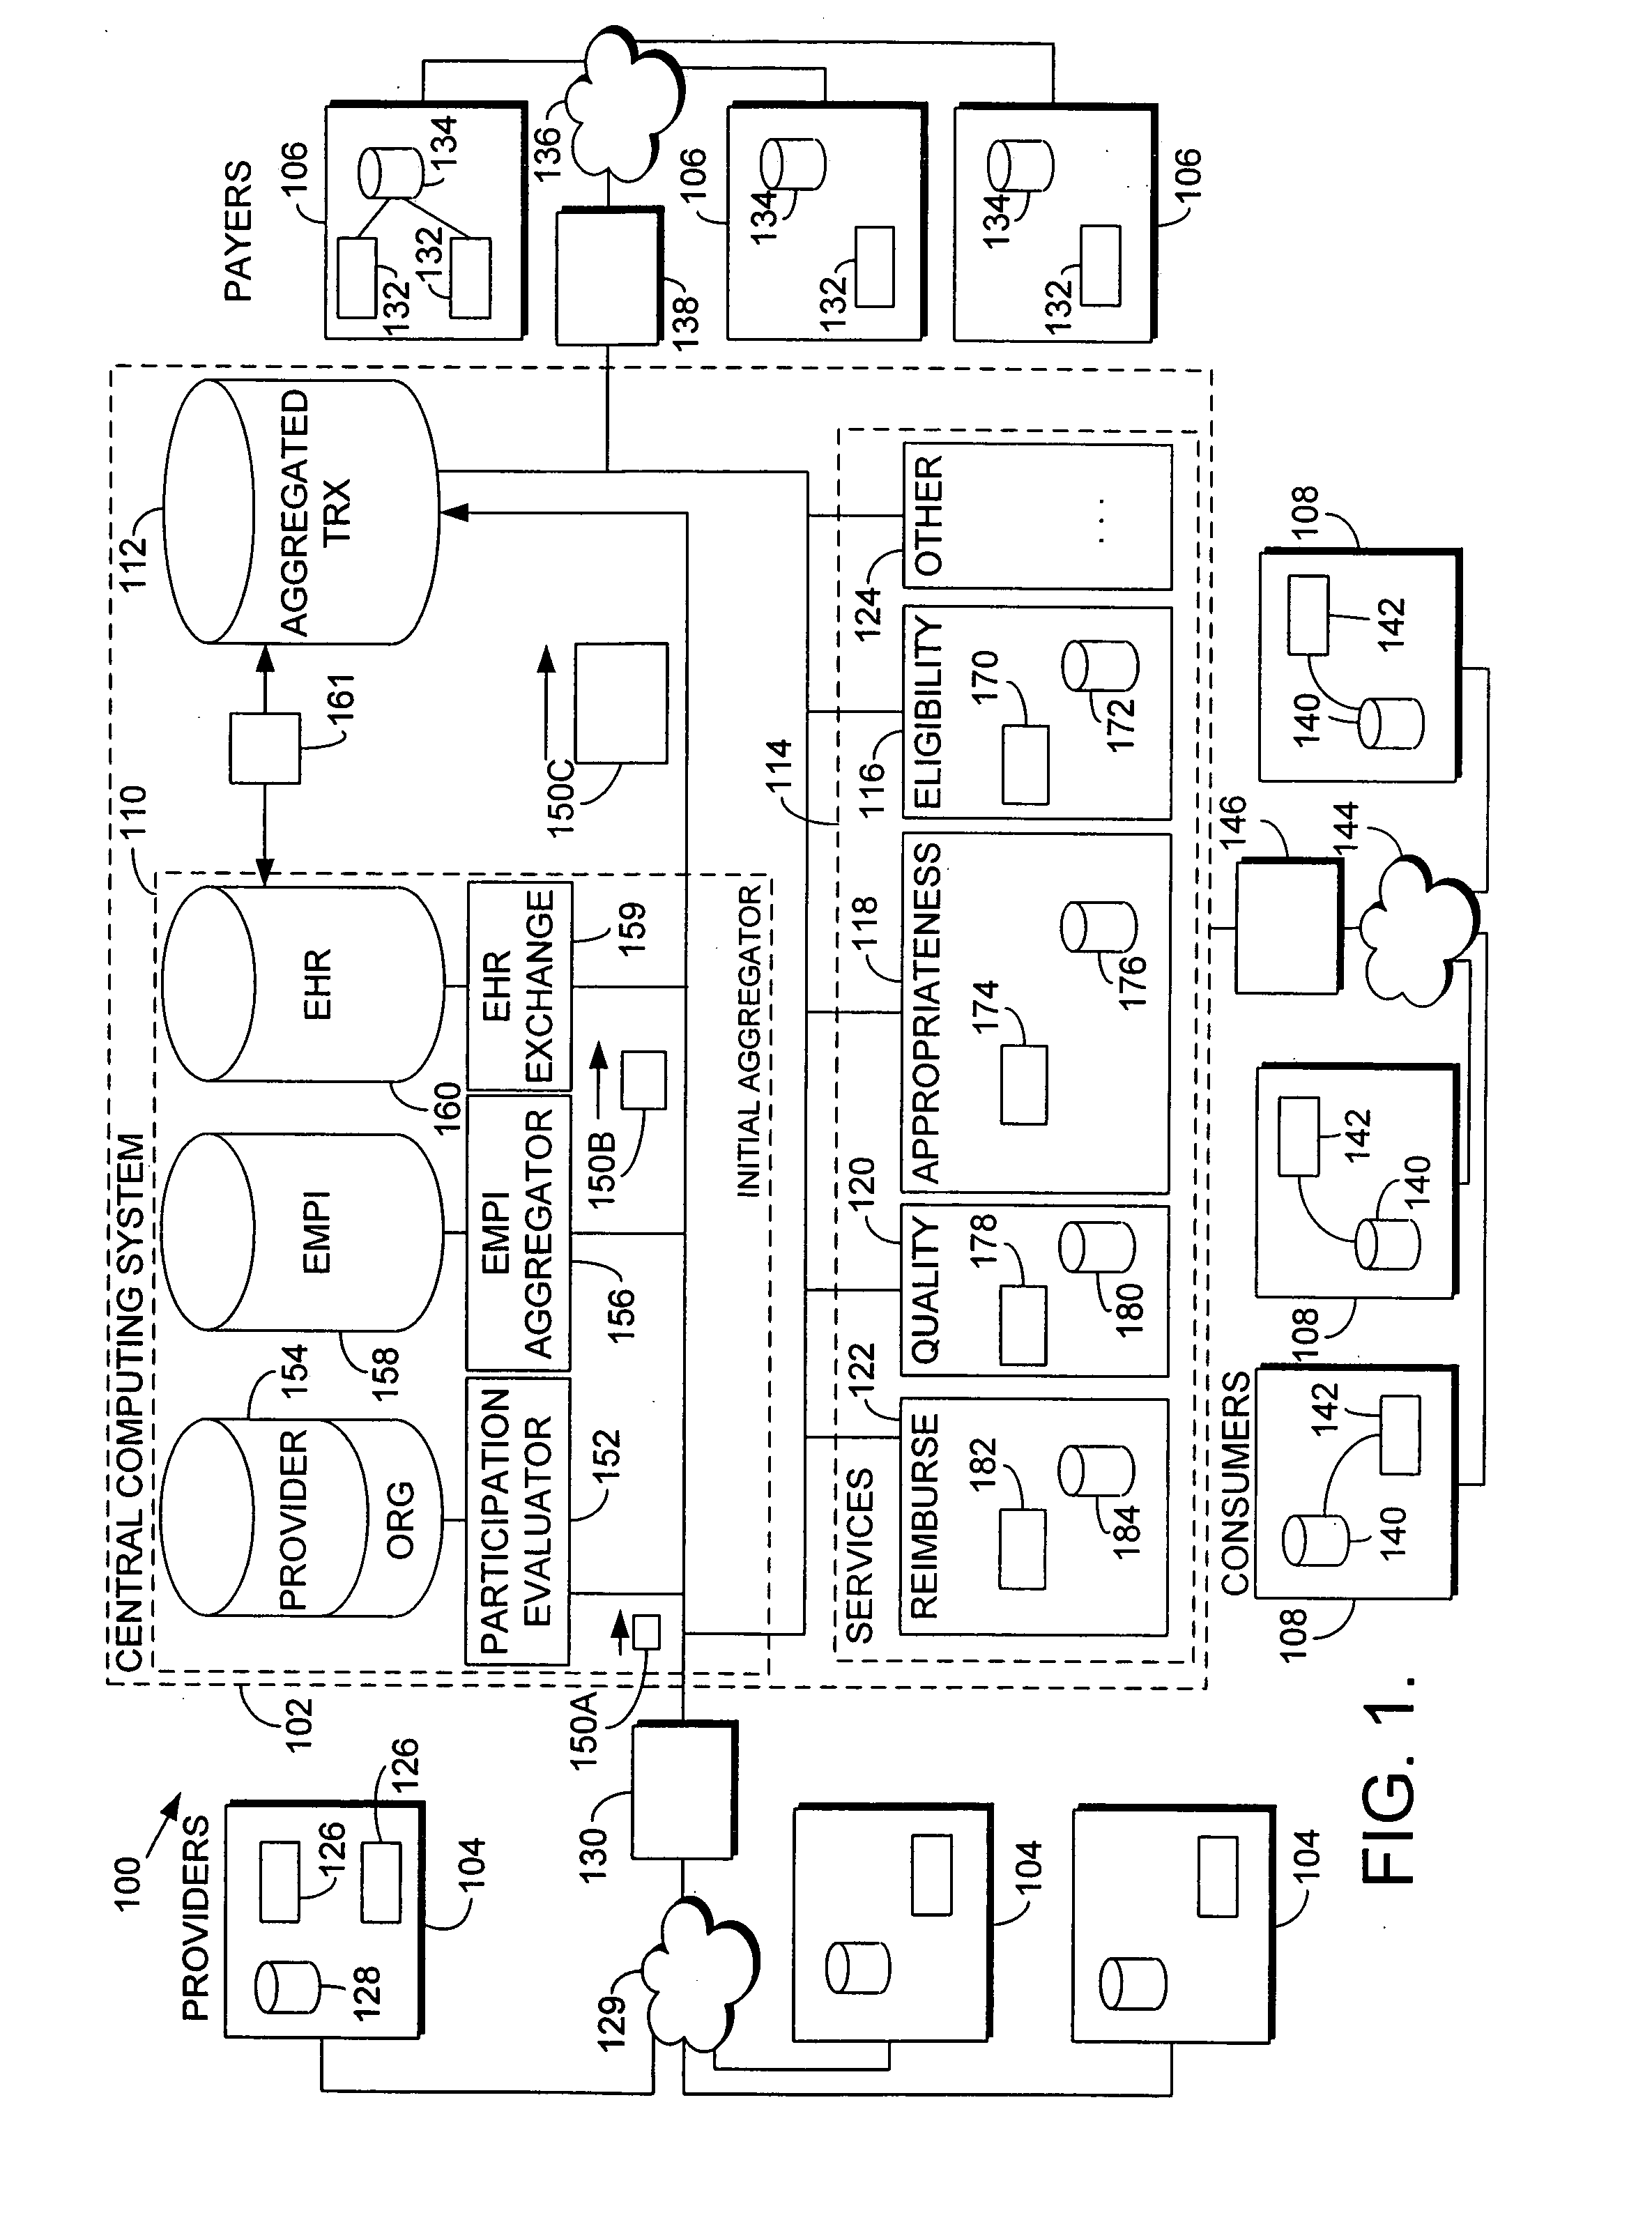 Computerized system and methods of adjudicating medical appropriateness